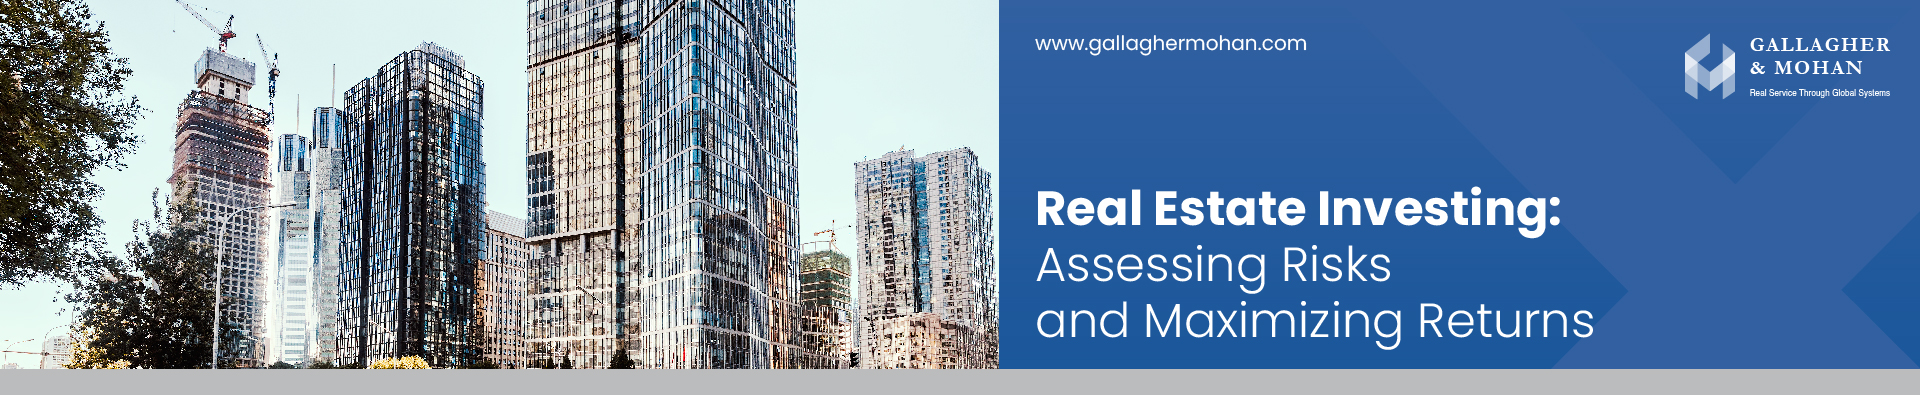 Real Estate Investing Assessing Risks And Maximizing Returns